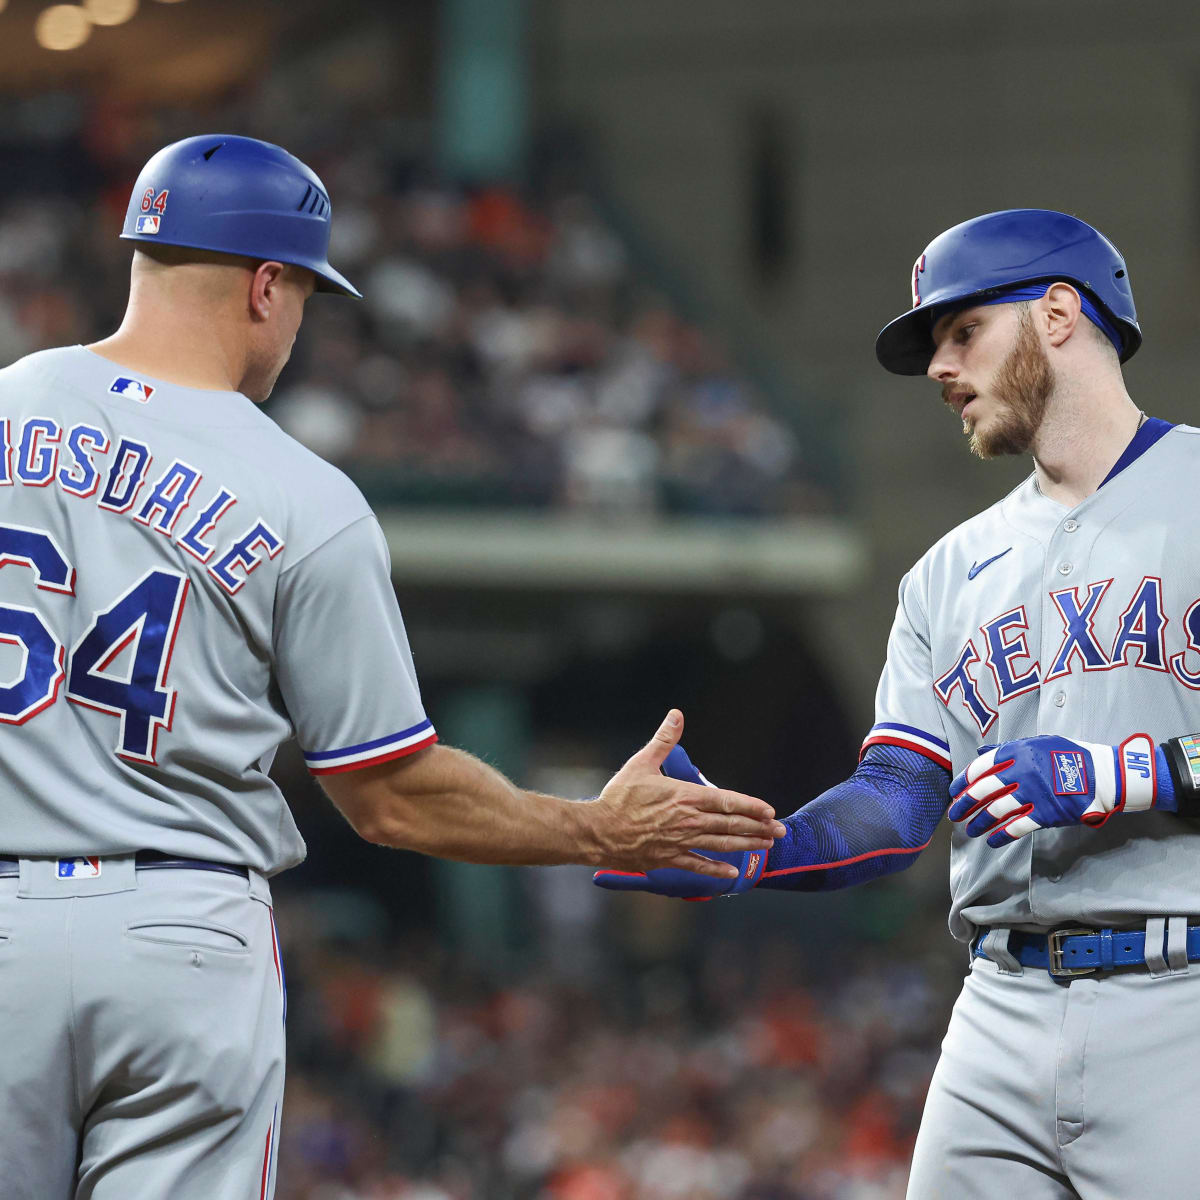 Perhaps Jonah Heim's injury has been a blessing in disguise for Bruce  Bochy, Rangers